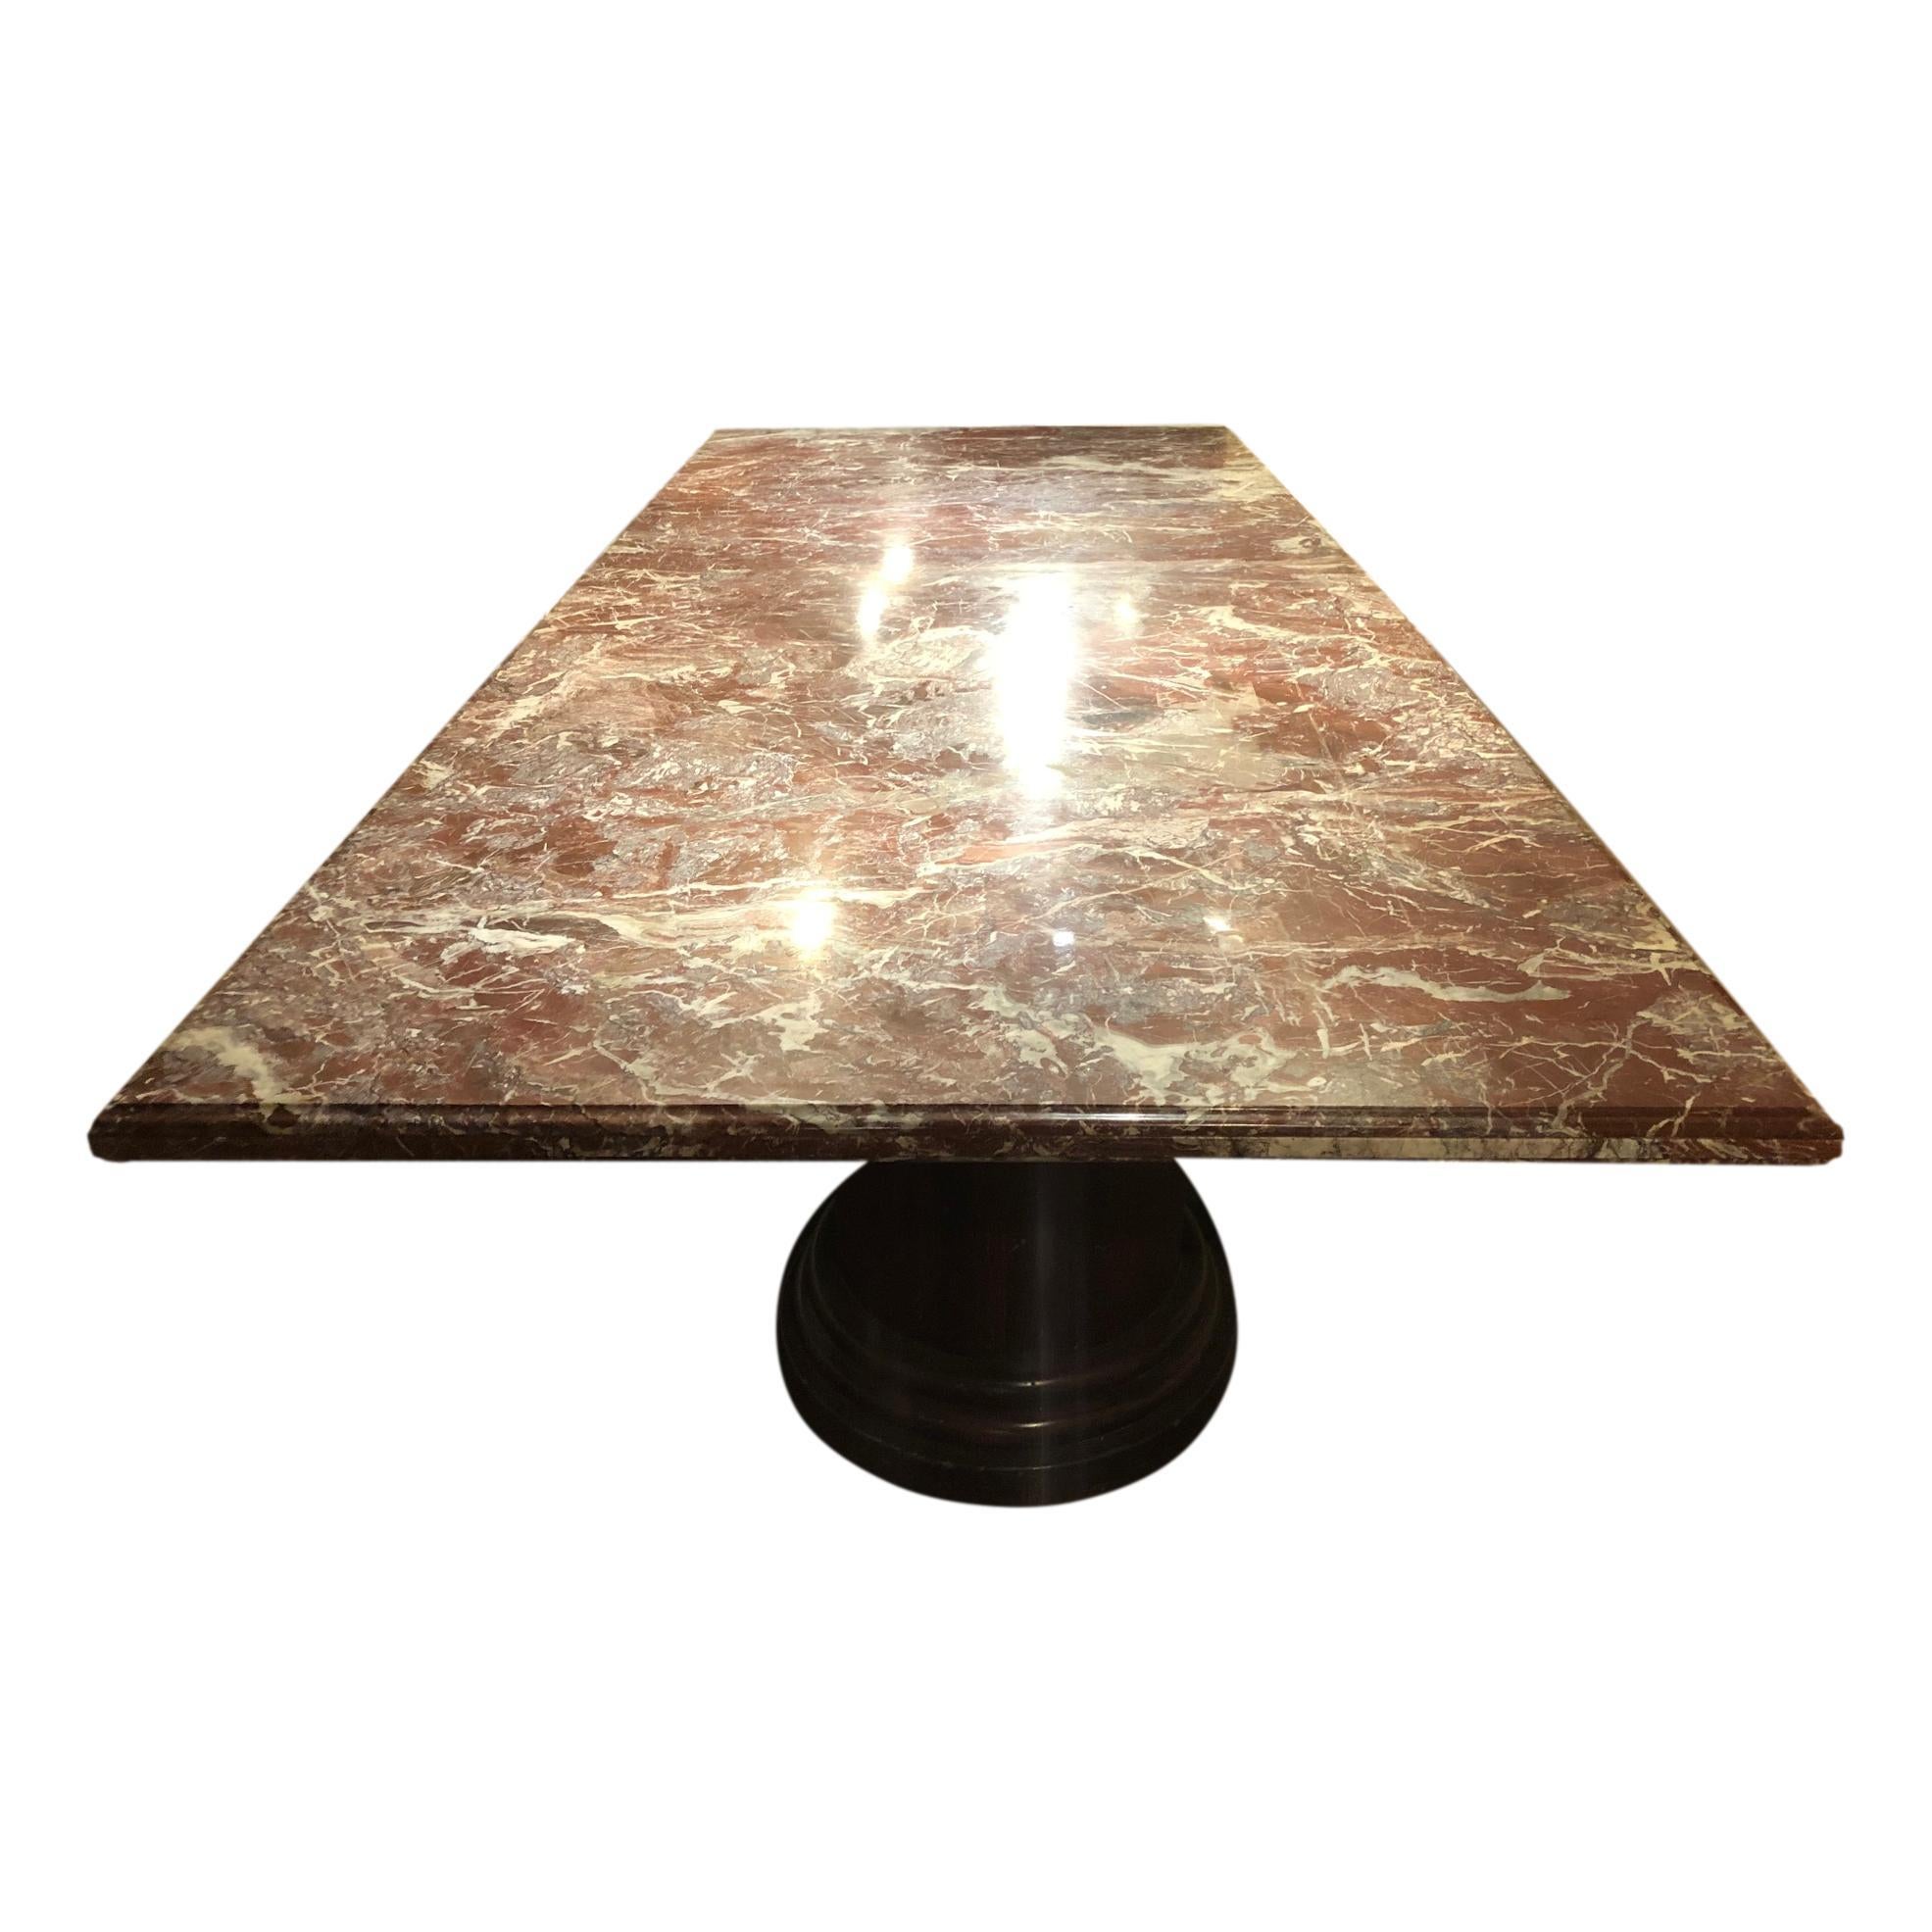 A large circa 1970's Italian conference table with red marble top in two parts that sit on the three pedestals bases. It is very sturdy and in great condition.

Measurements:
Height: 29.5